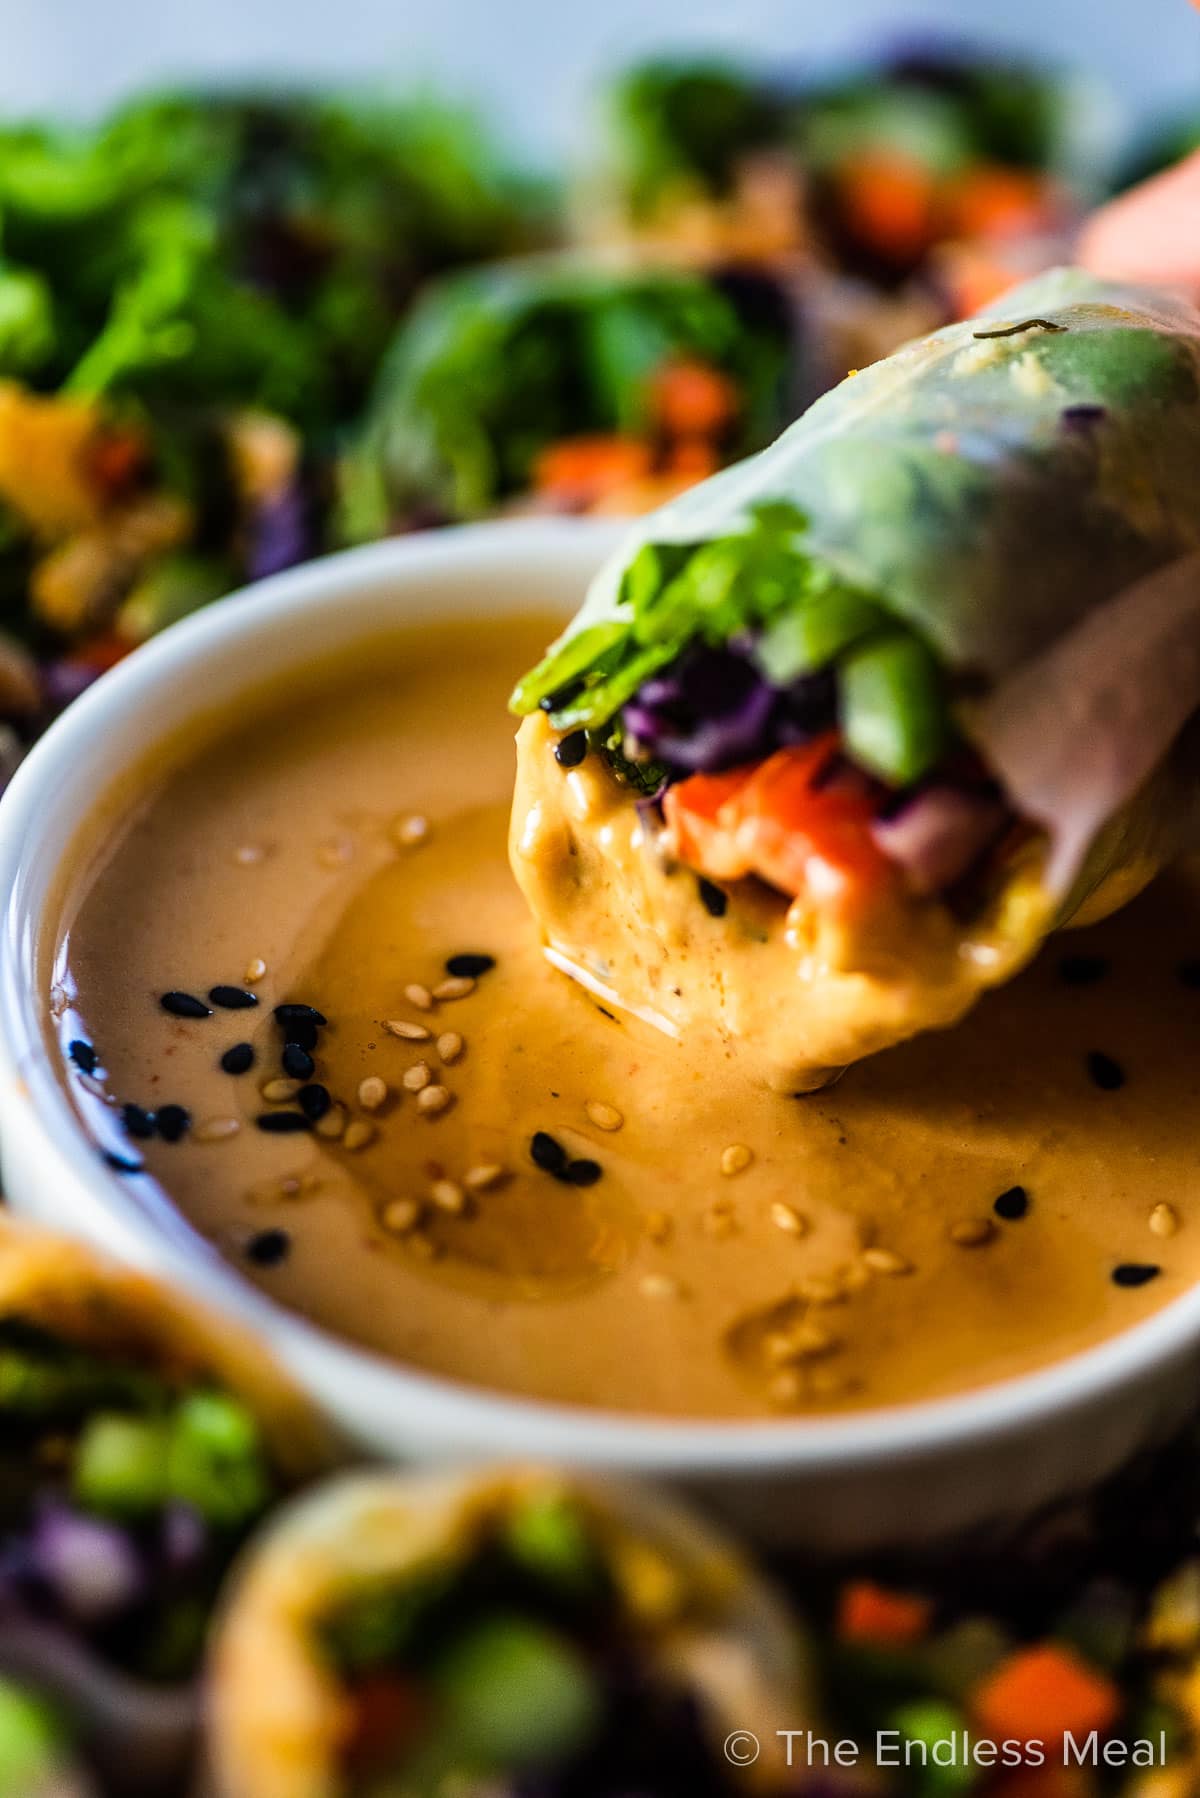 A fresh spring roll being dipped into spicy tahini sauce.